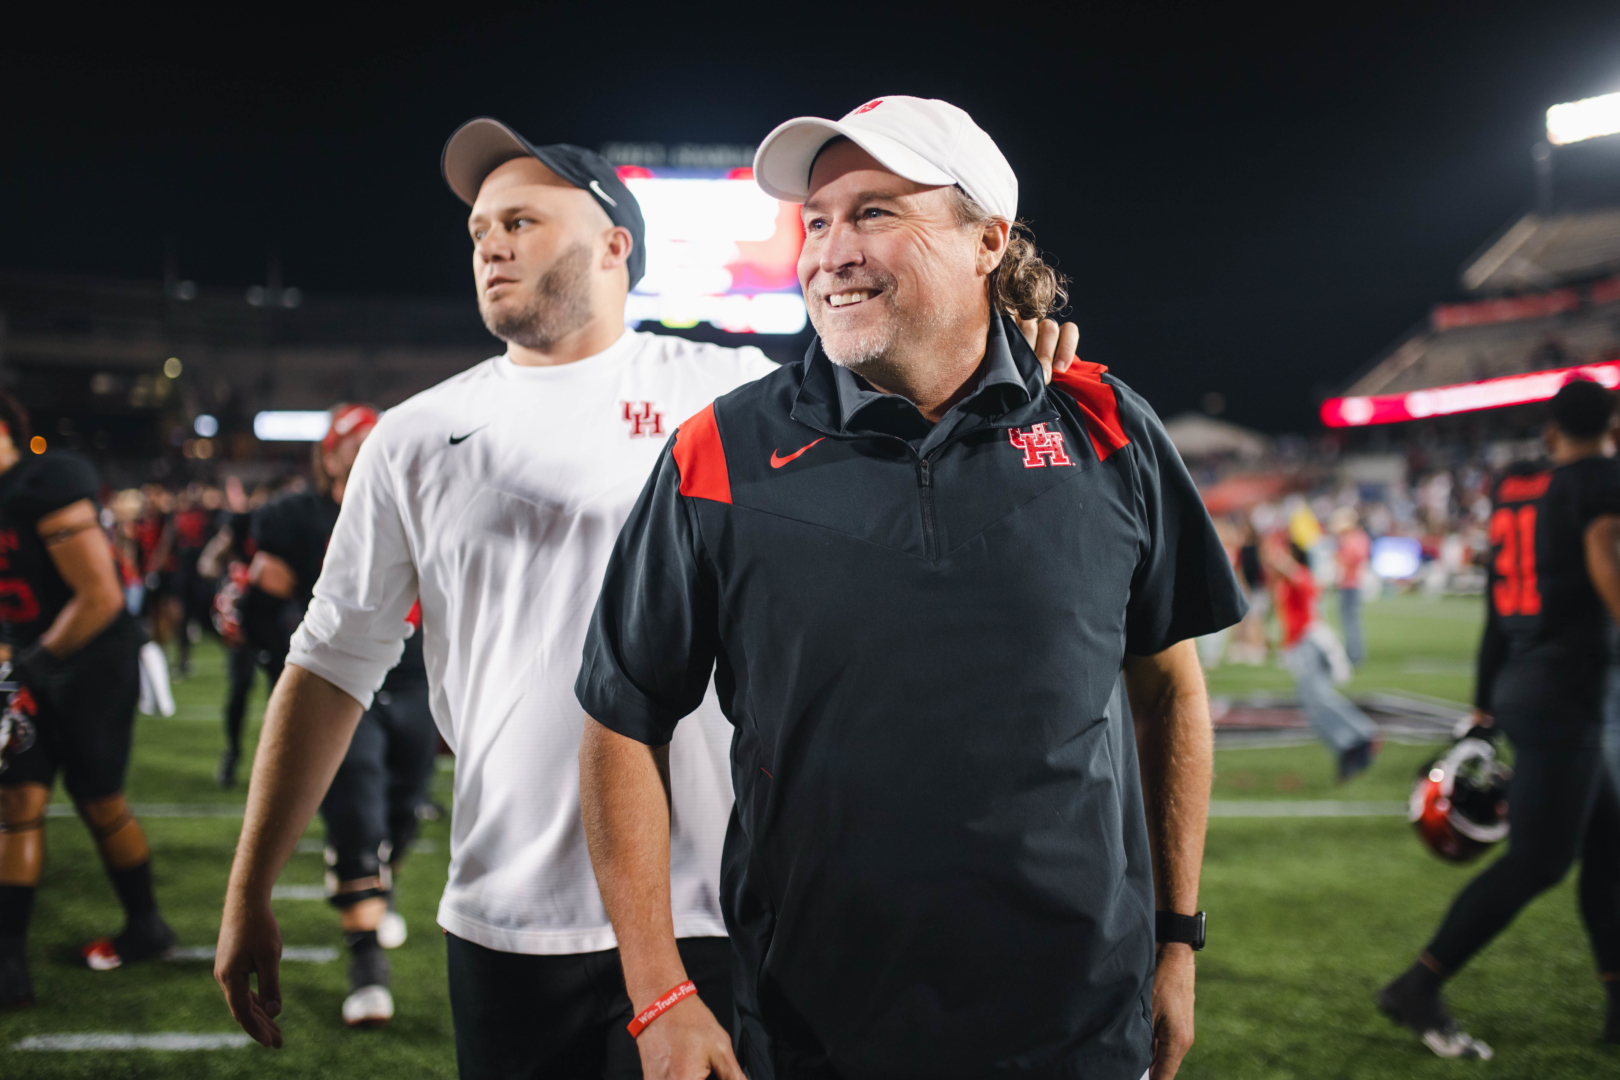 Dana Holgorsen was all smiles after UH knocked off undefeated SMU on Saturday night at TDECU Stadium. | James Schillinger/The Cougar